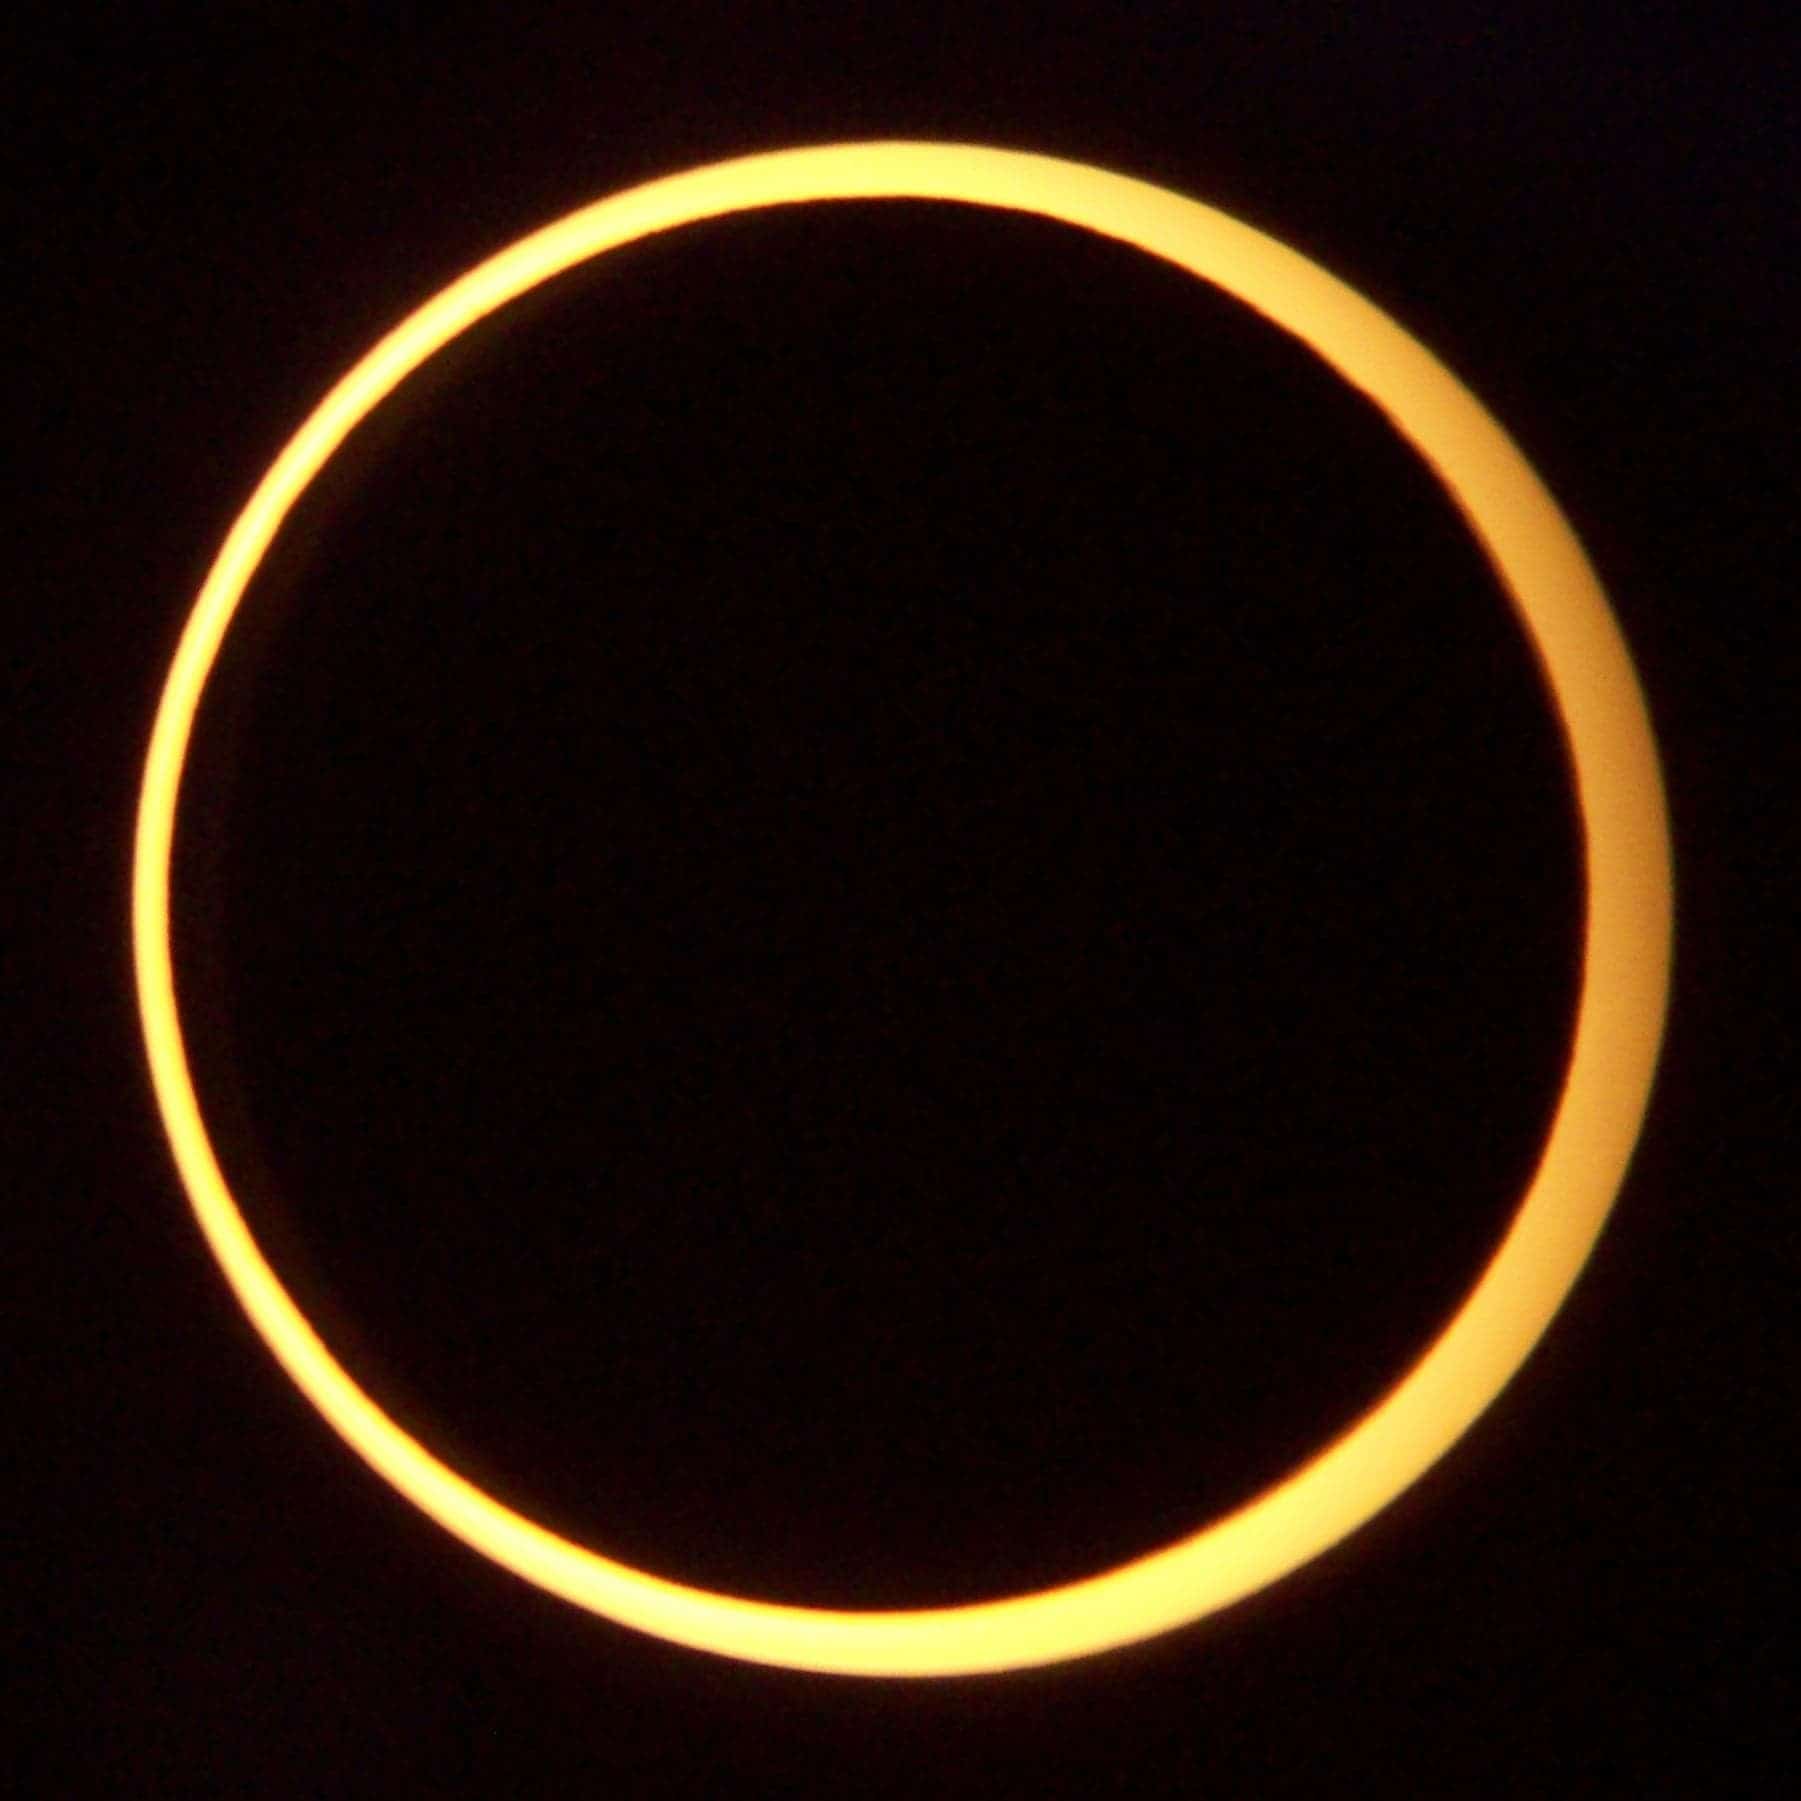 Annular Eclipse. Taken from Middlegate, Nevada on May 20, 2012. Credit: Wikimedia Commons.